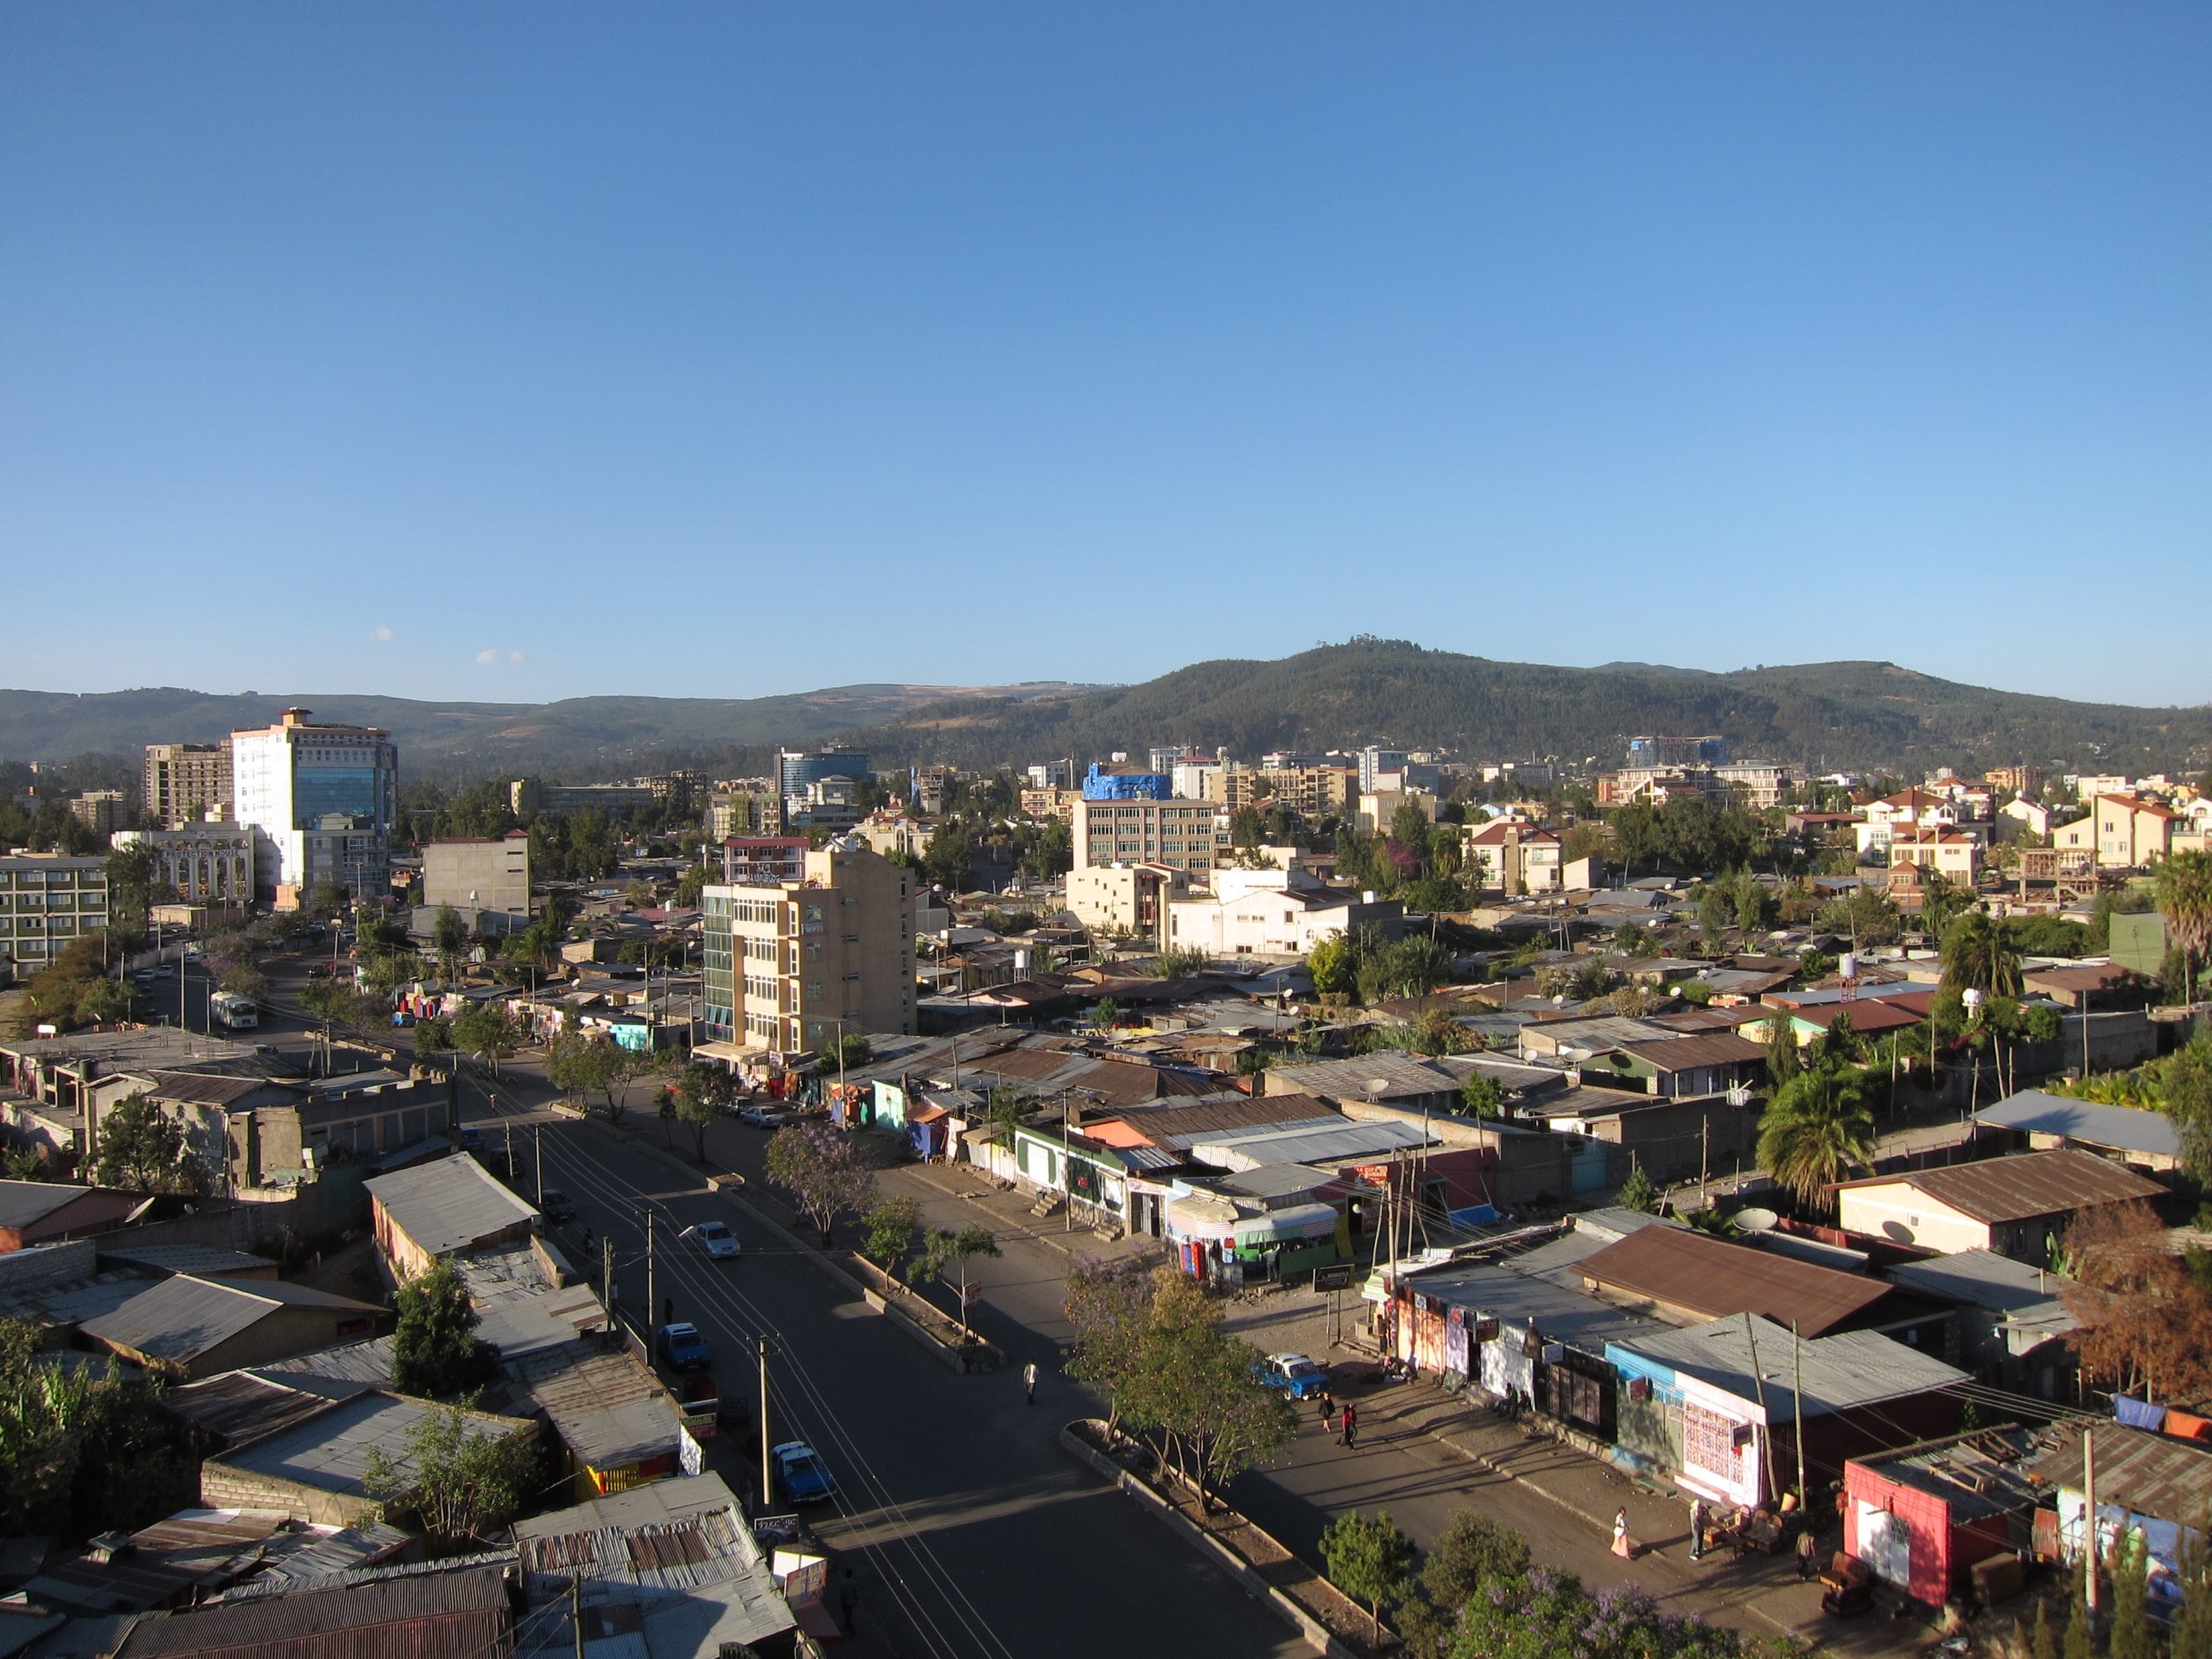 Back from Addis Ababa, Ethiopia:  An attractive destination for investors